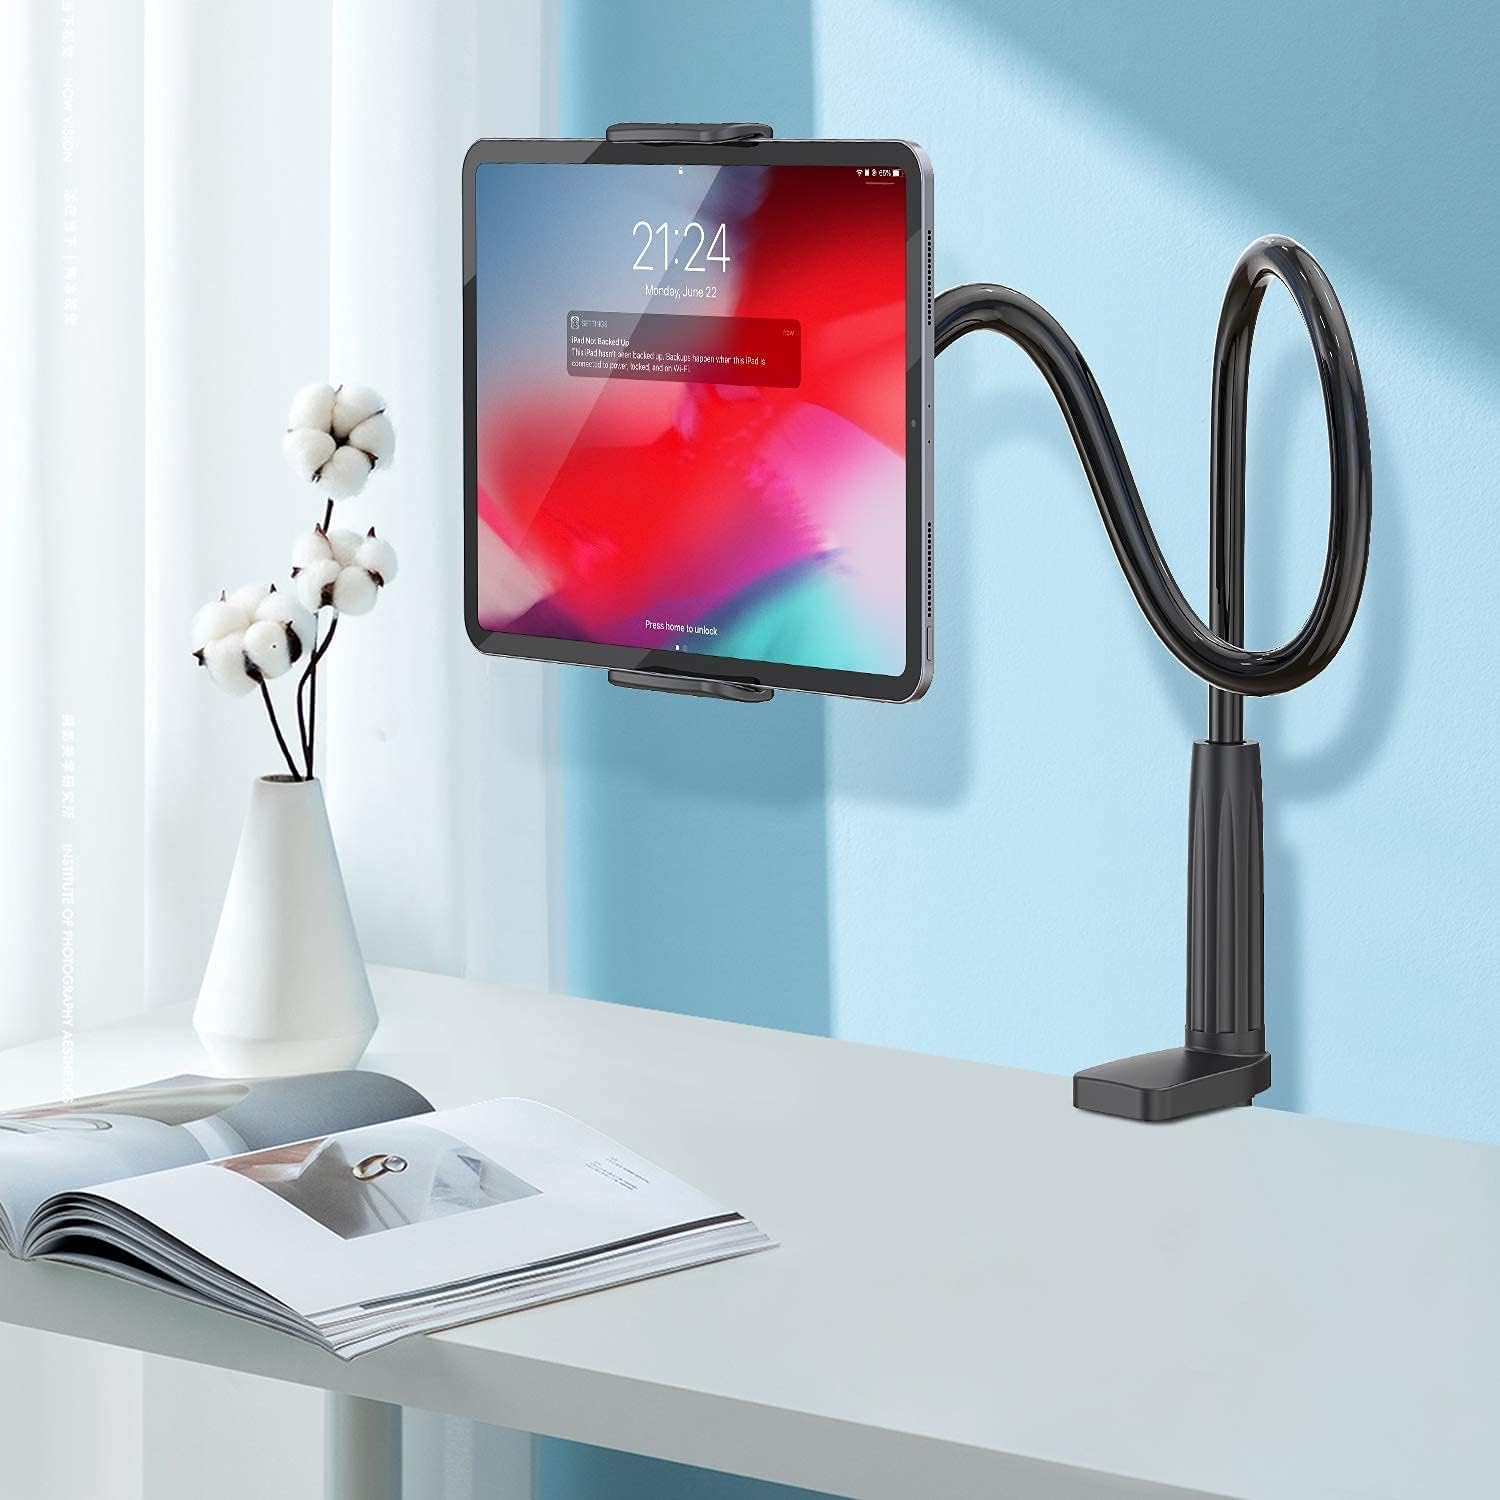 WixGear Tablet Holder Mount, Gooseneck Tablet Stand, Tablet Holder for Table Top, Holder for Bed Couch Stand, Compatible with iPads, Samsung Galaxy Tablets, Amazon Fire HD and More